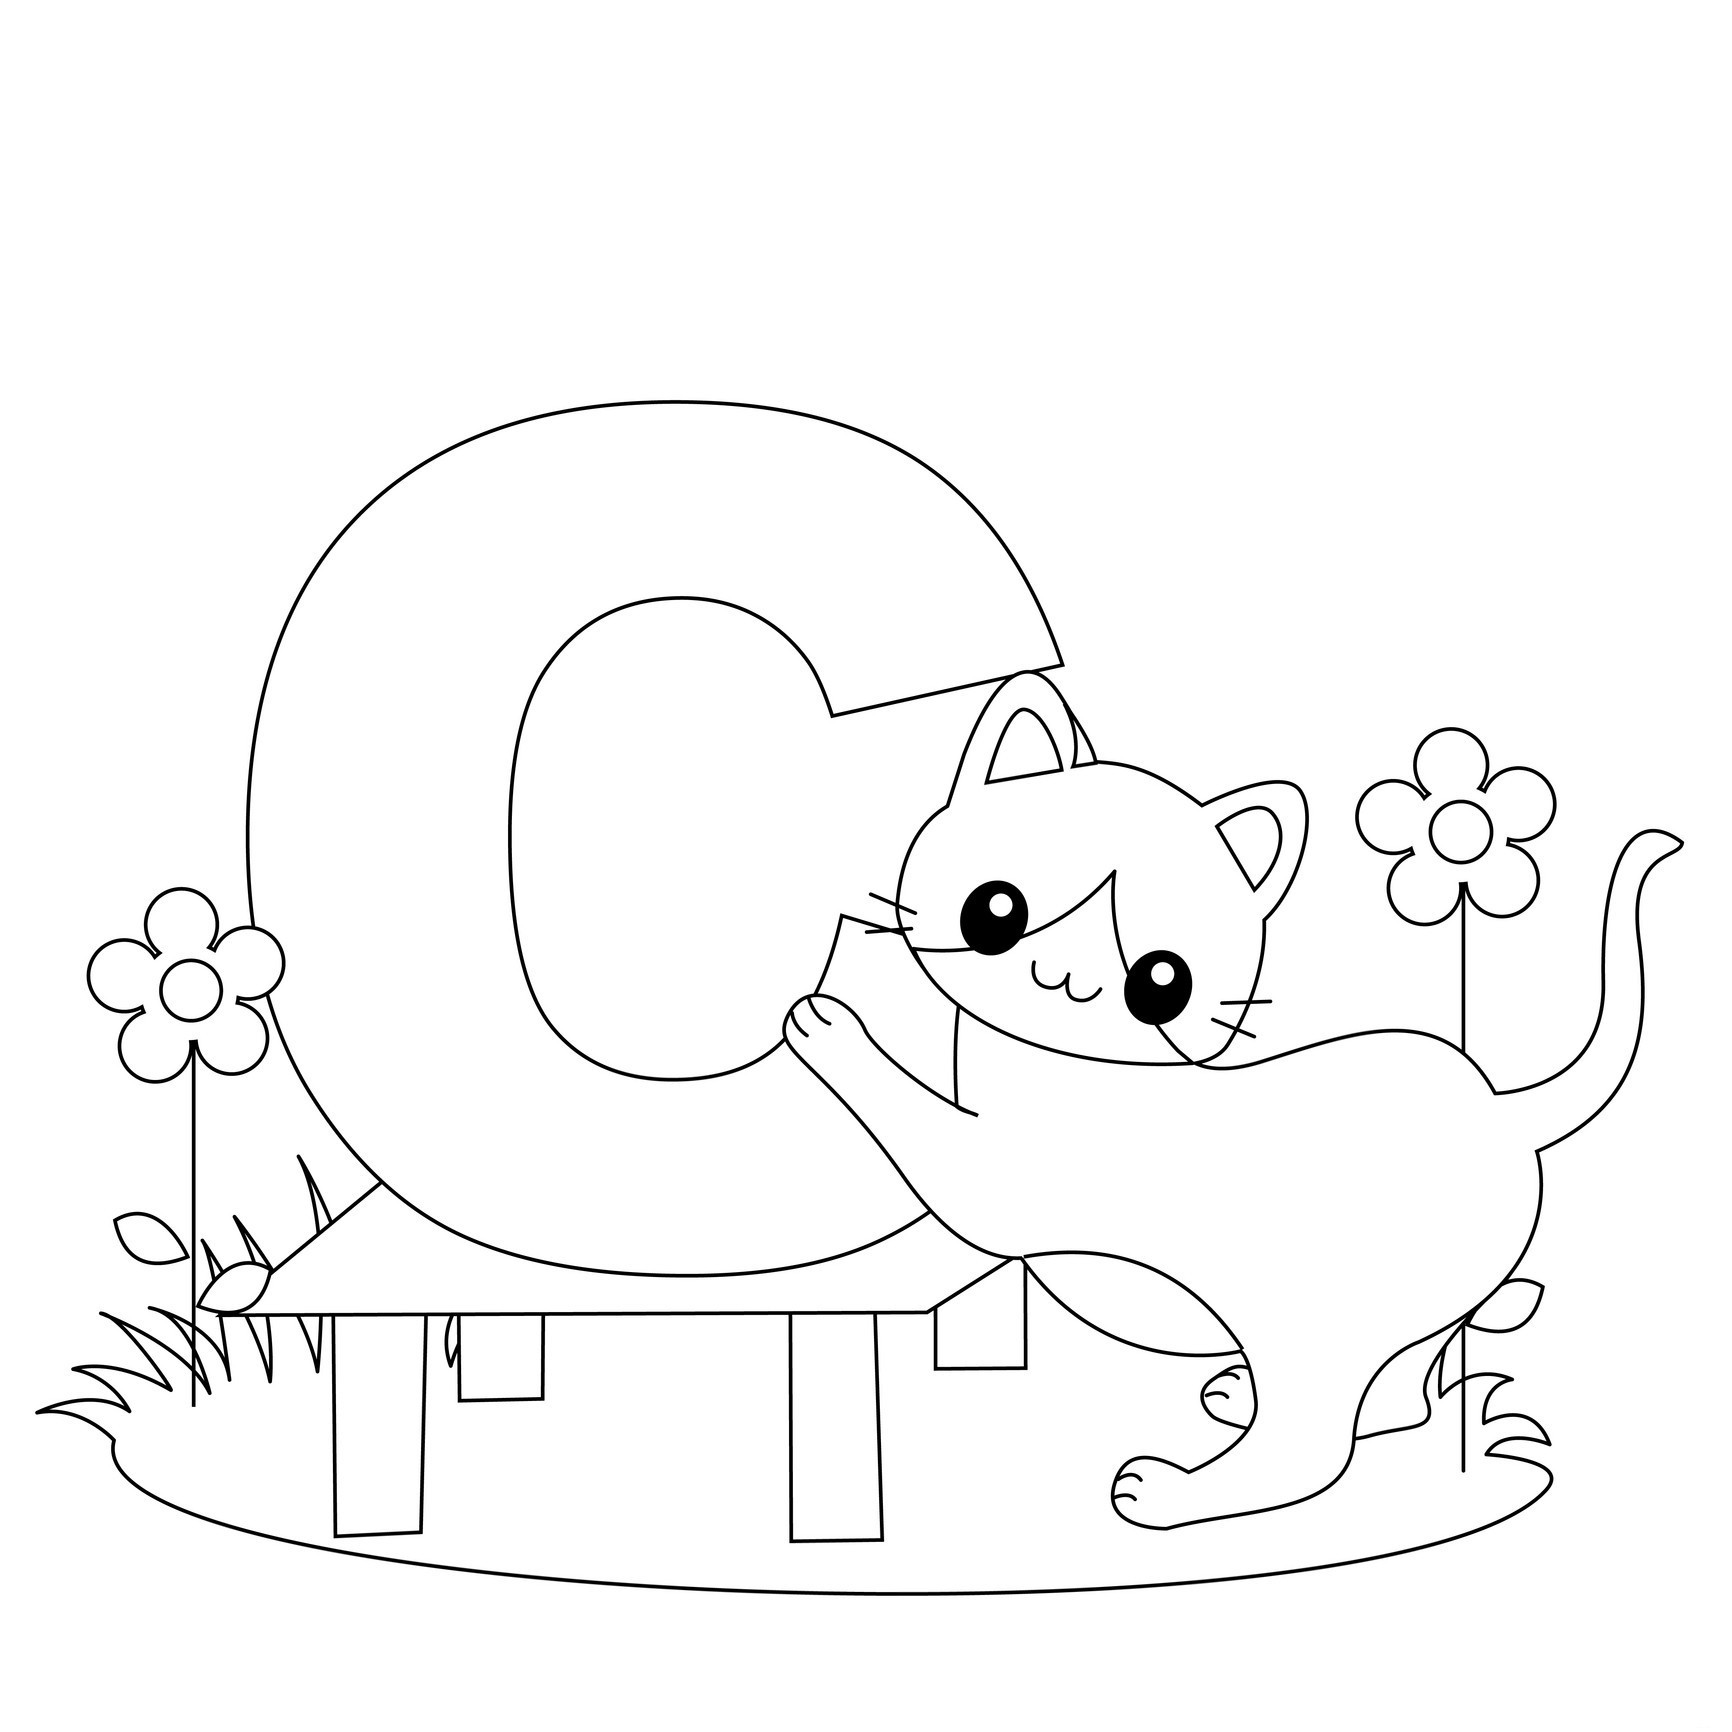 Alphabet Coloring Pages For Toddlers
 Free Printable Alphabet Coloring Pages for Kids Best